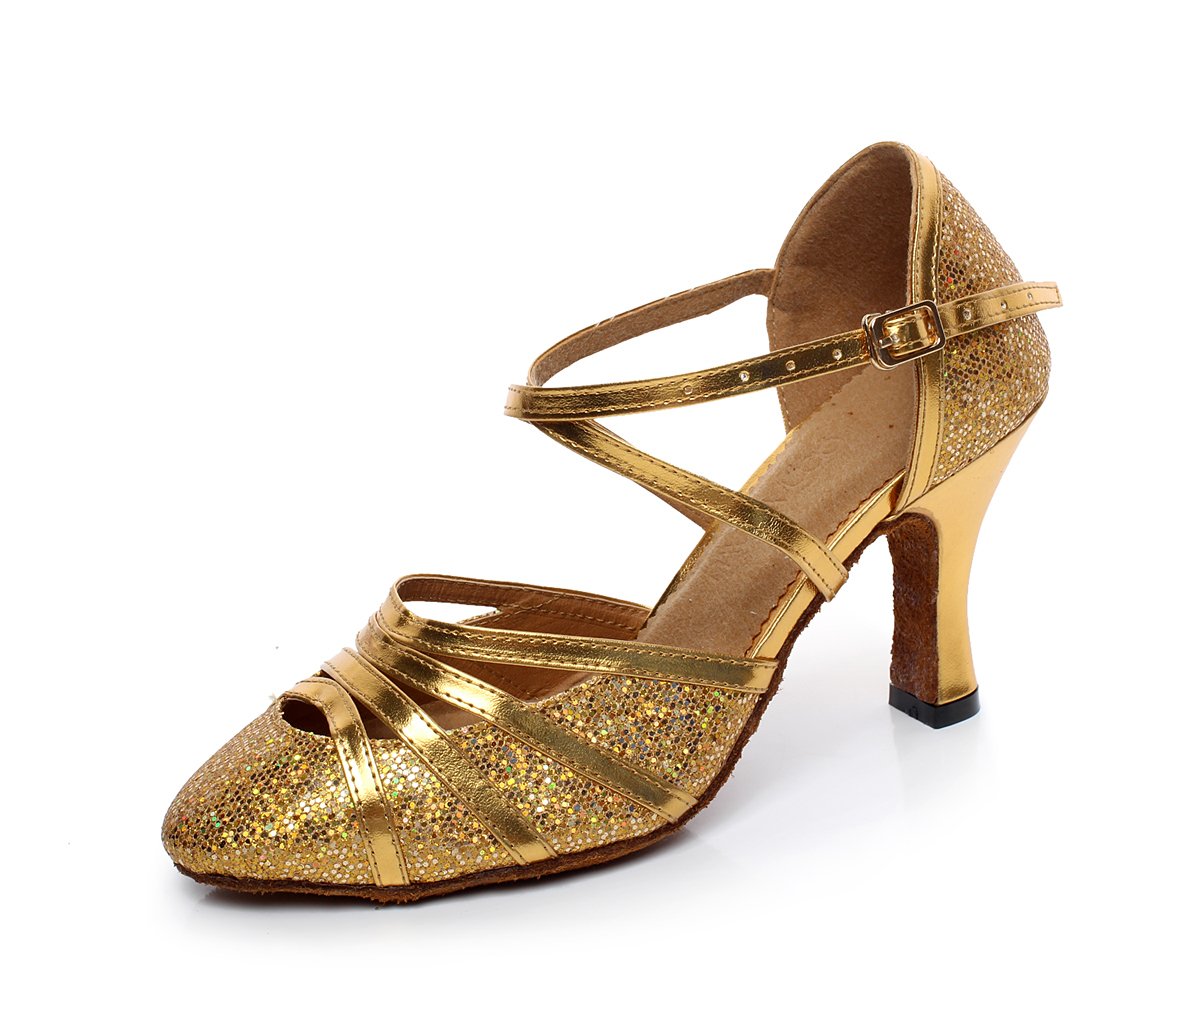 Gold 6134 - The Drag Shoes - Shoes, Boots and Heels for Drag Queen Artists.